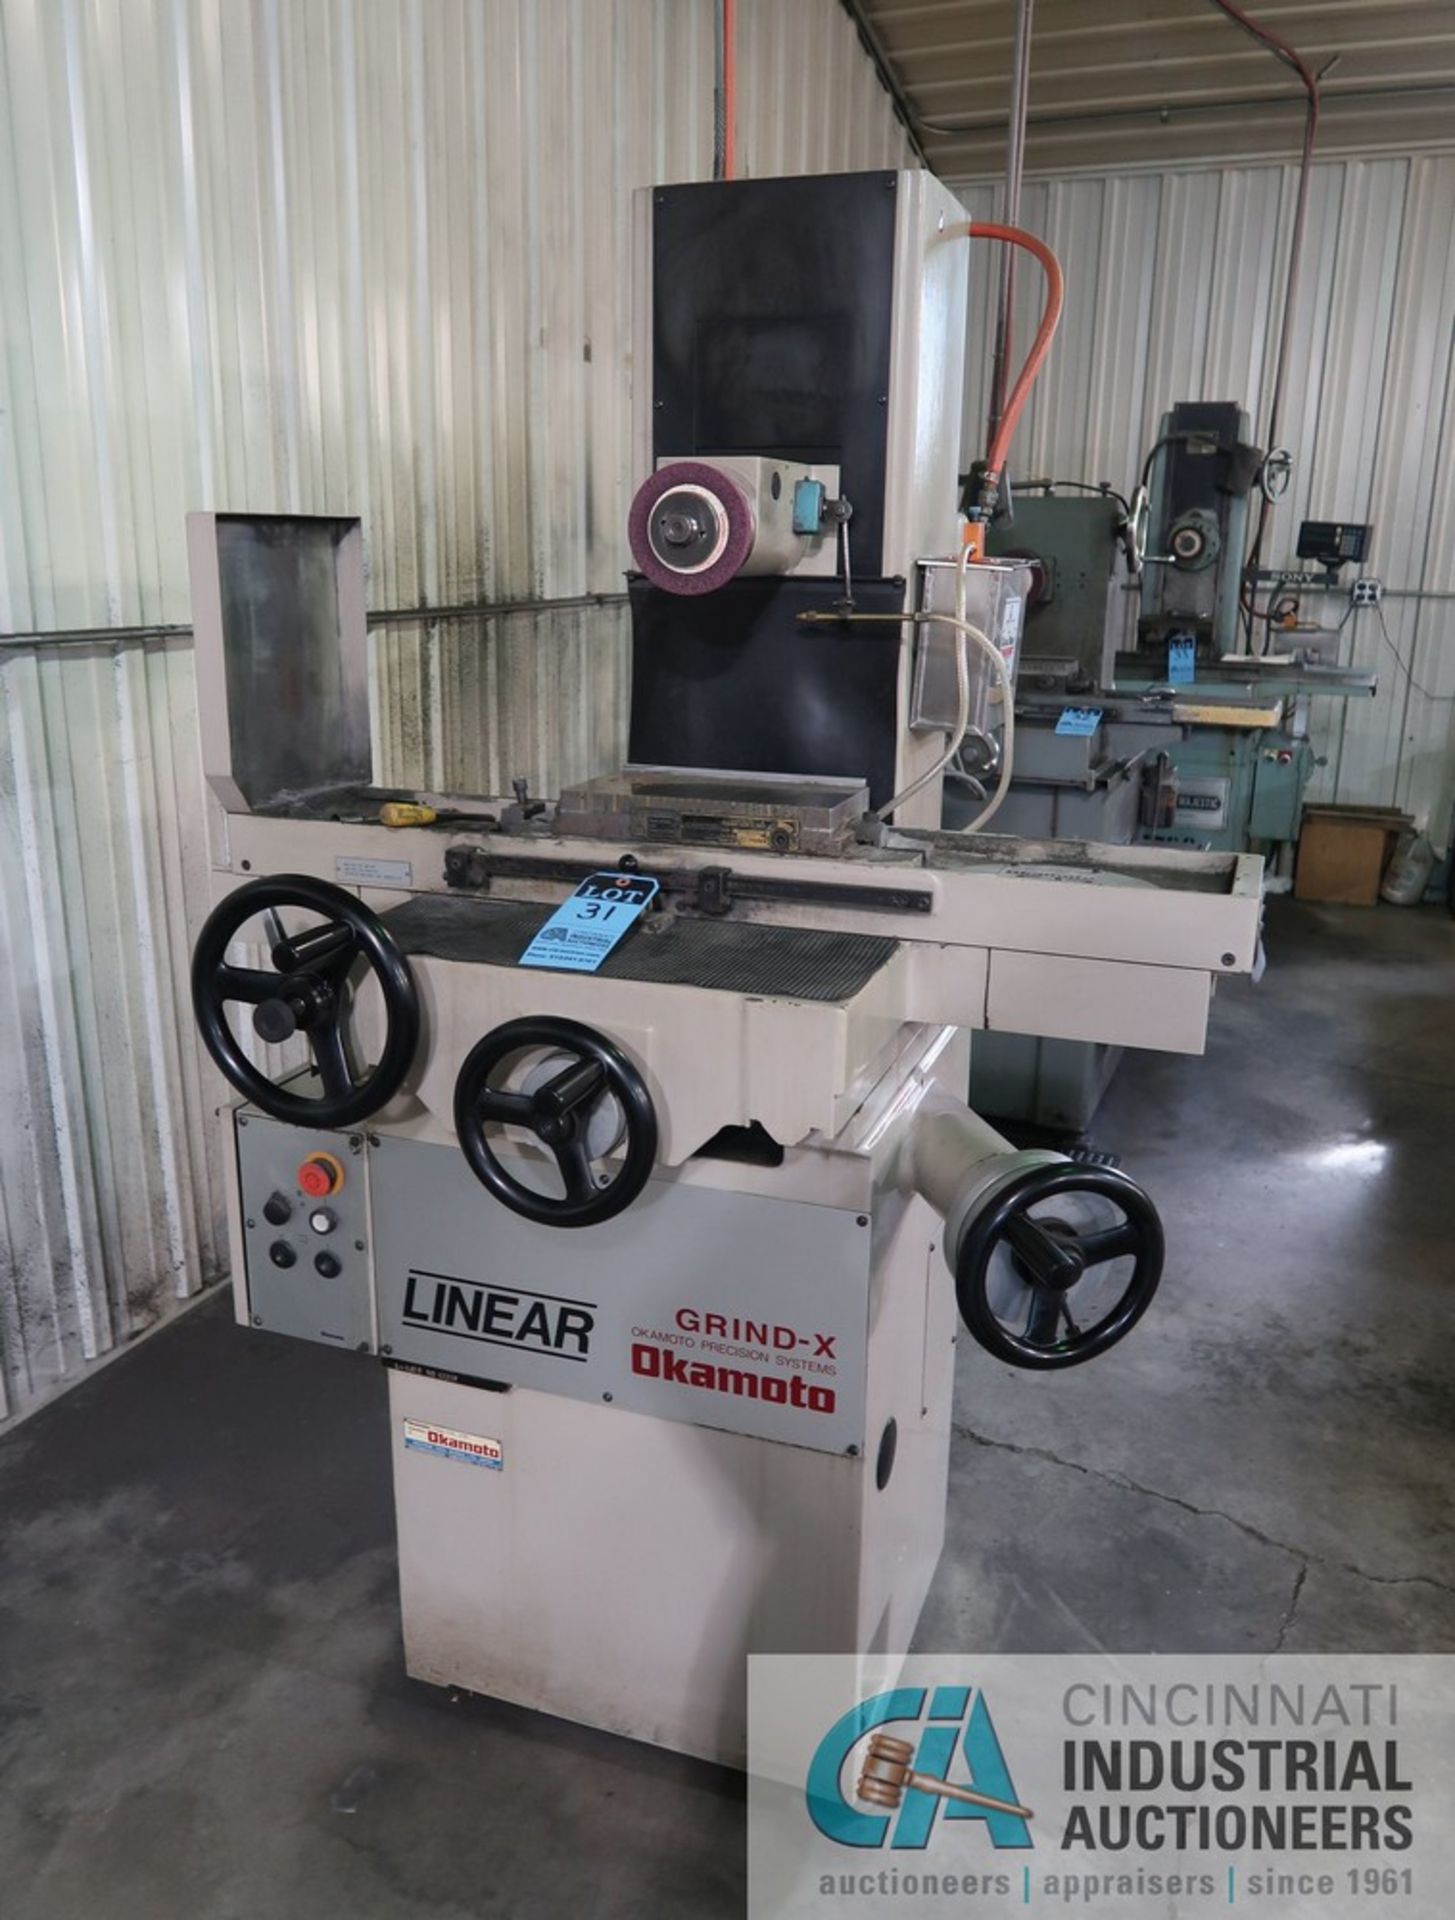 6" X 12" OKAMOTO MODEL L.6-12B LINEAR GRIND-X HAND FEED SURFACE GRINDER S/N 62202, 3 PHASE, 230/